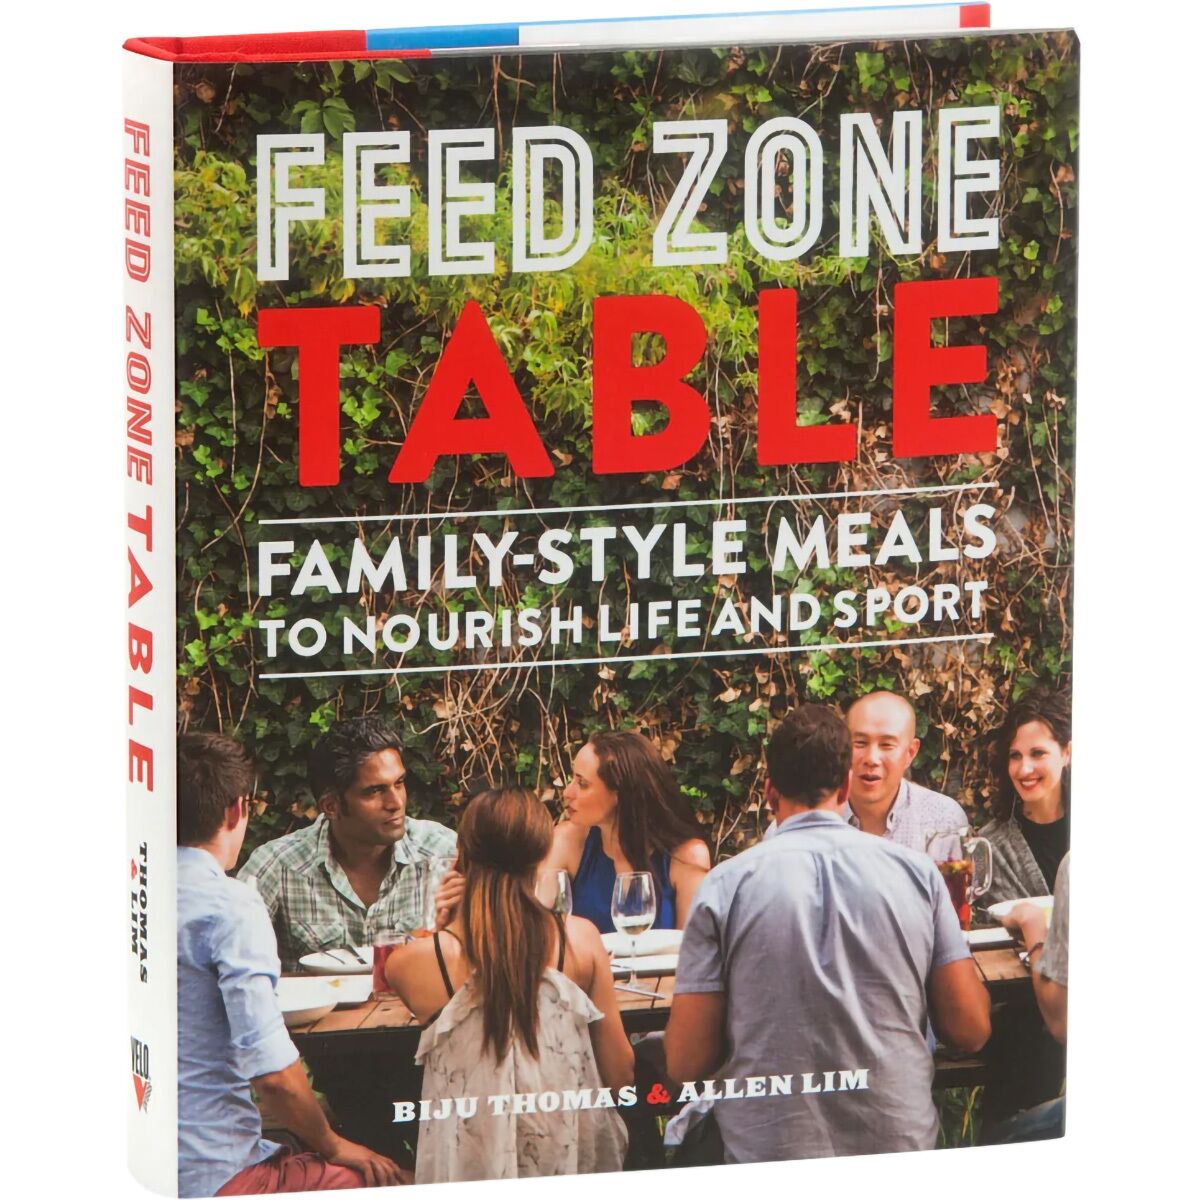 Skratch Labs The Feed Zone Table Cook Book One Color, One Size